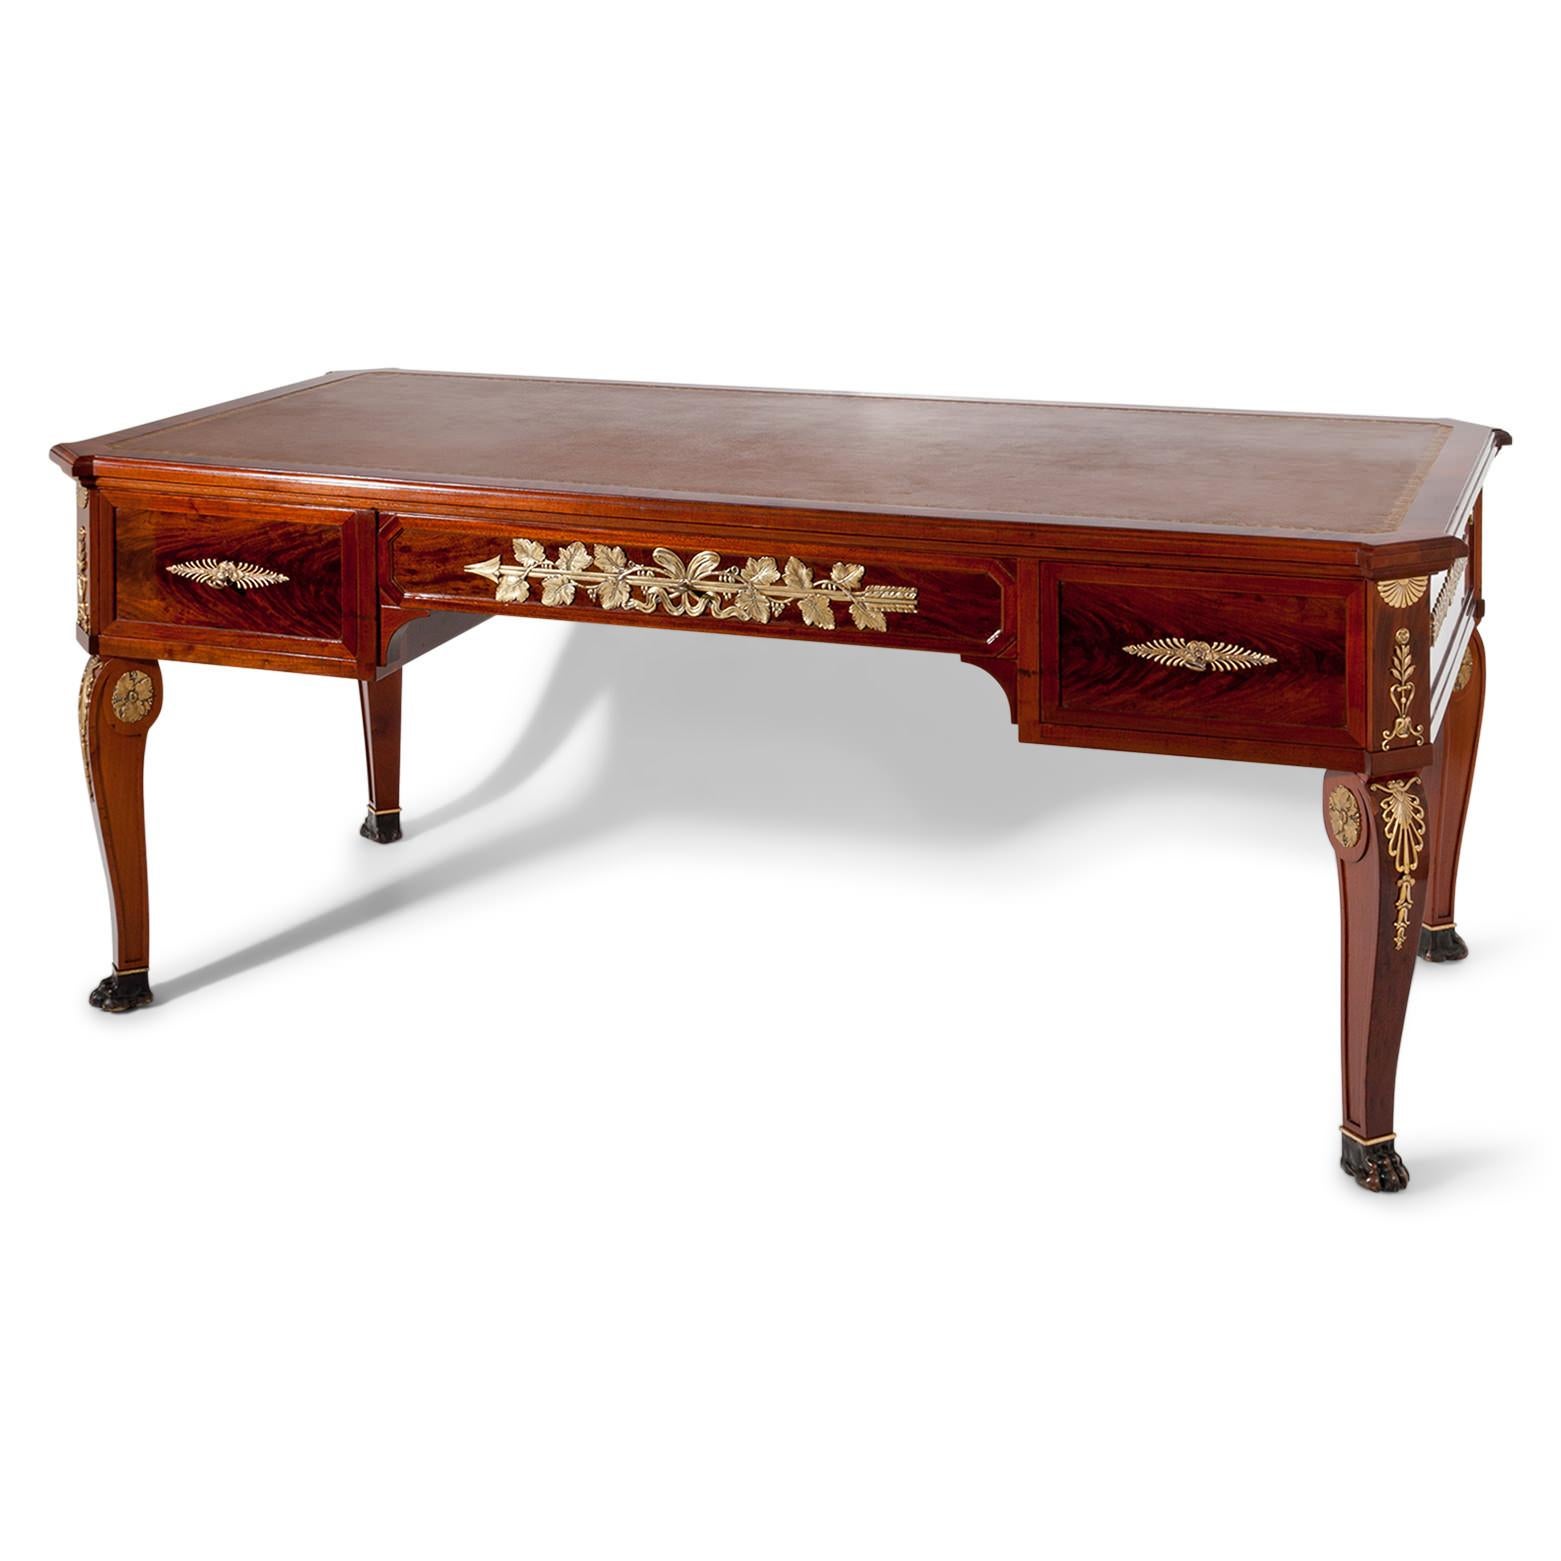 Bureau plat standing on curved legs with blackened lion’s paws. The desk has three drawers and is decorated with gilt brass fittings. The tabletop with slanted edges is covered with a brown leather.